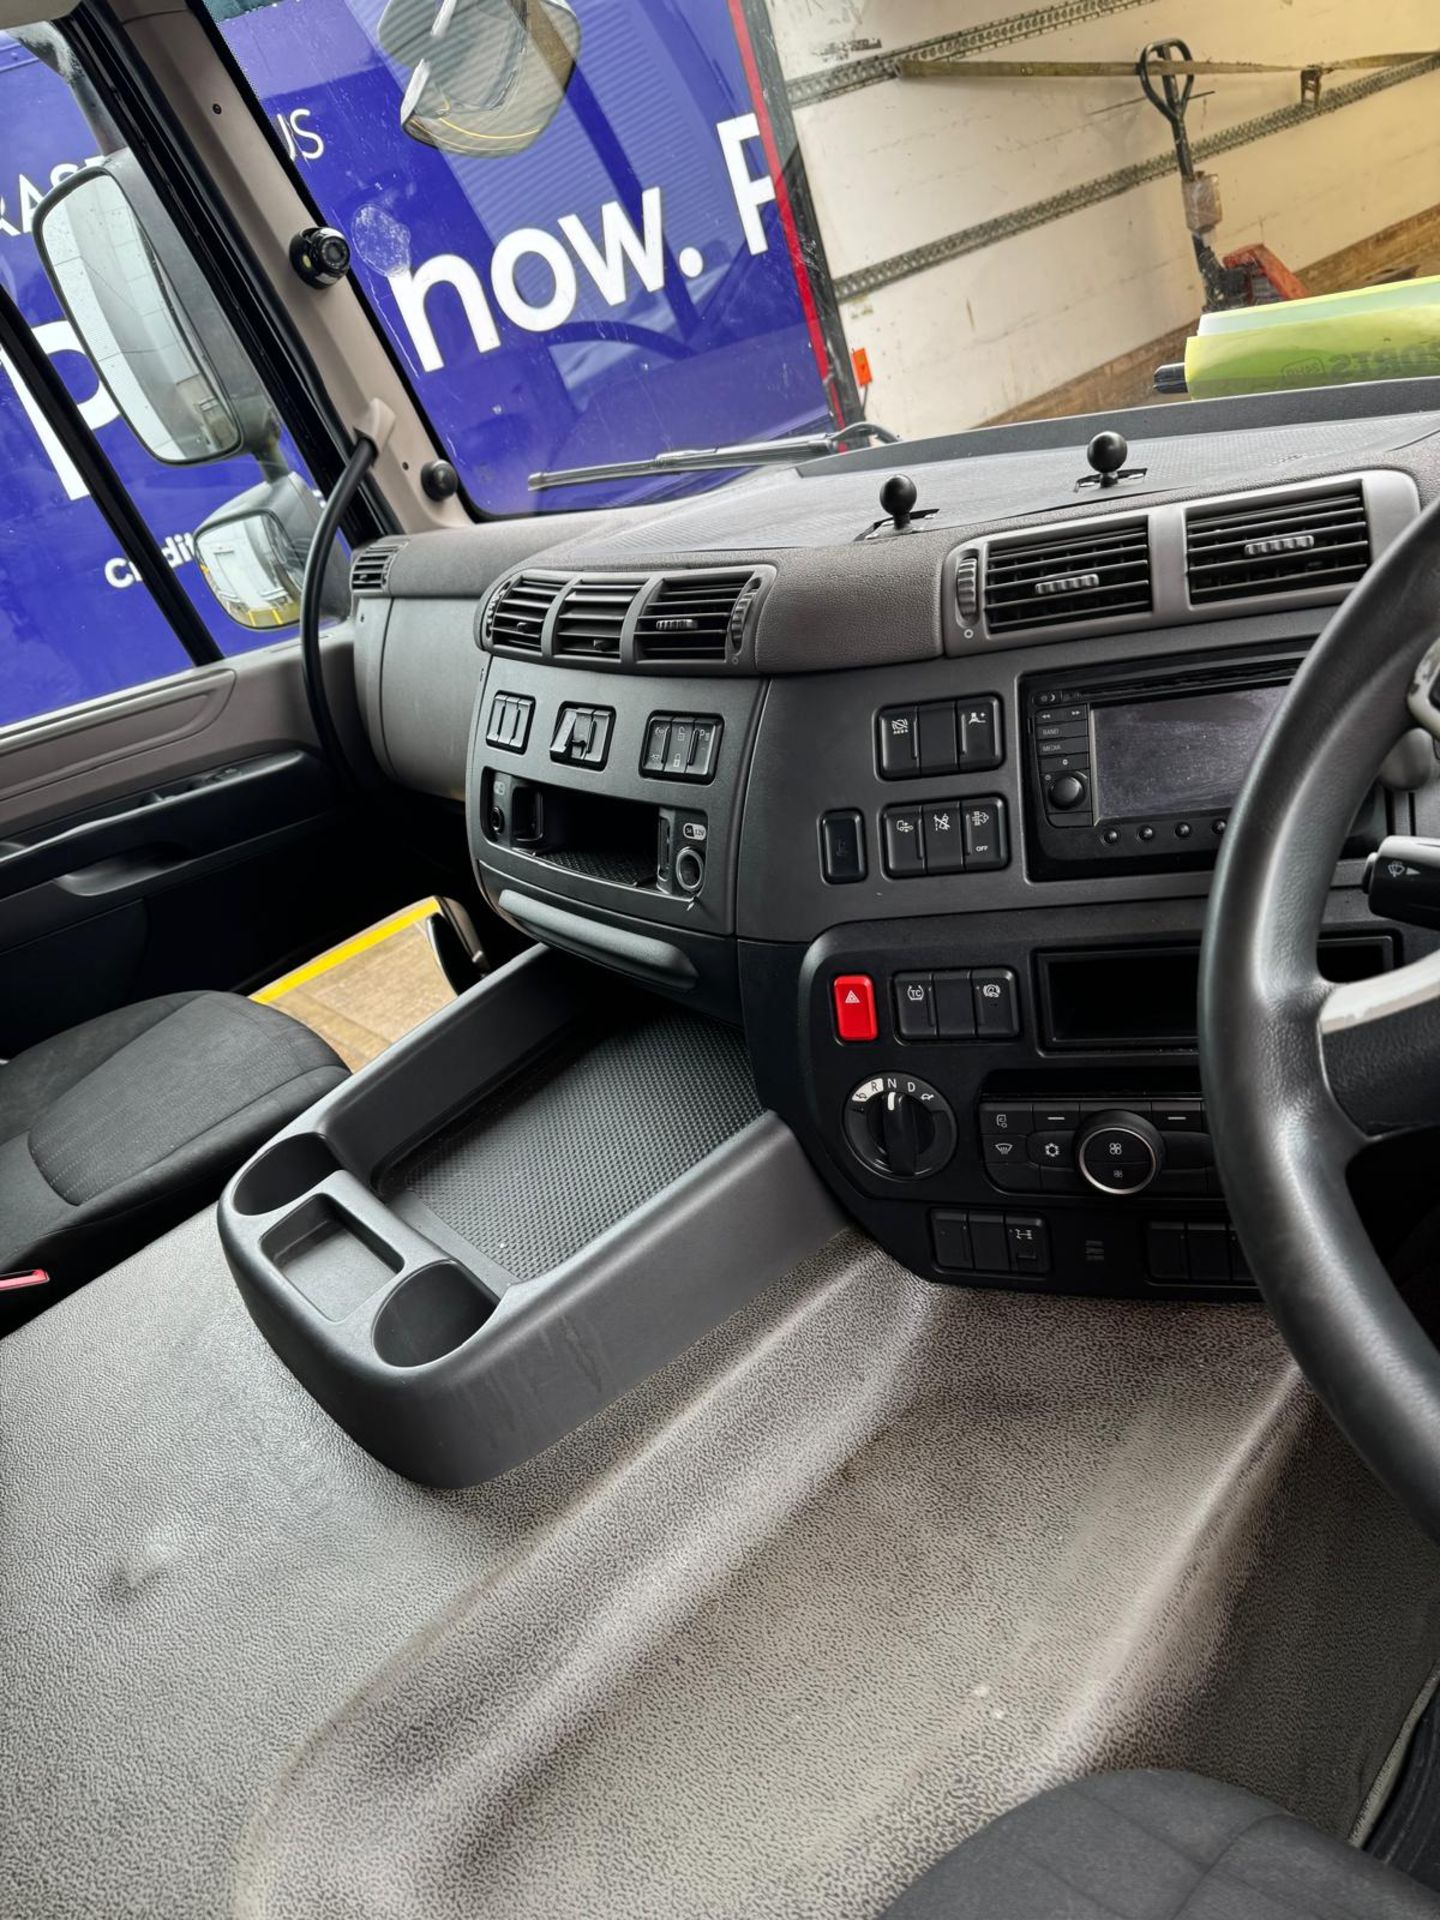 2019, DAF CF 260 FA (Ex-Fleet Owned & Maintained) - FN69 AXC (18 Ton Rigid Truck with Tail Lift) - Image 8 of 17